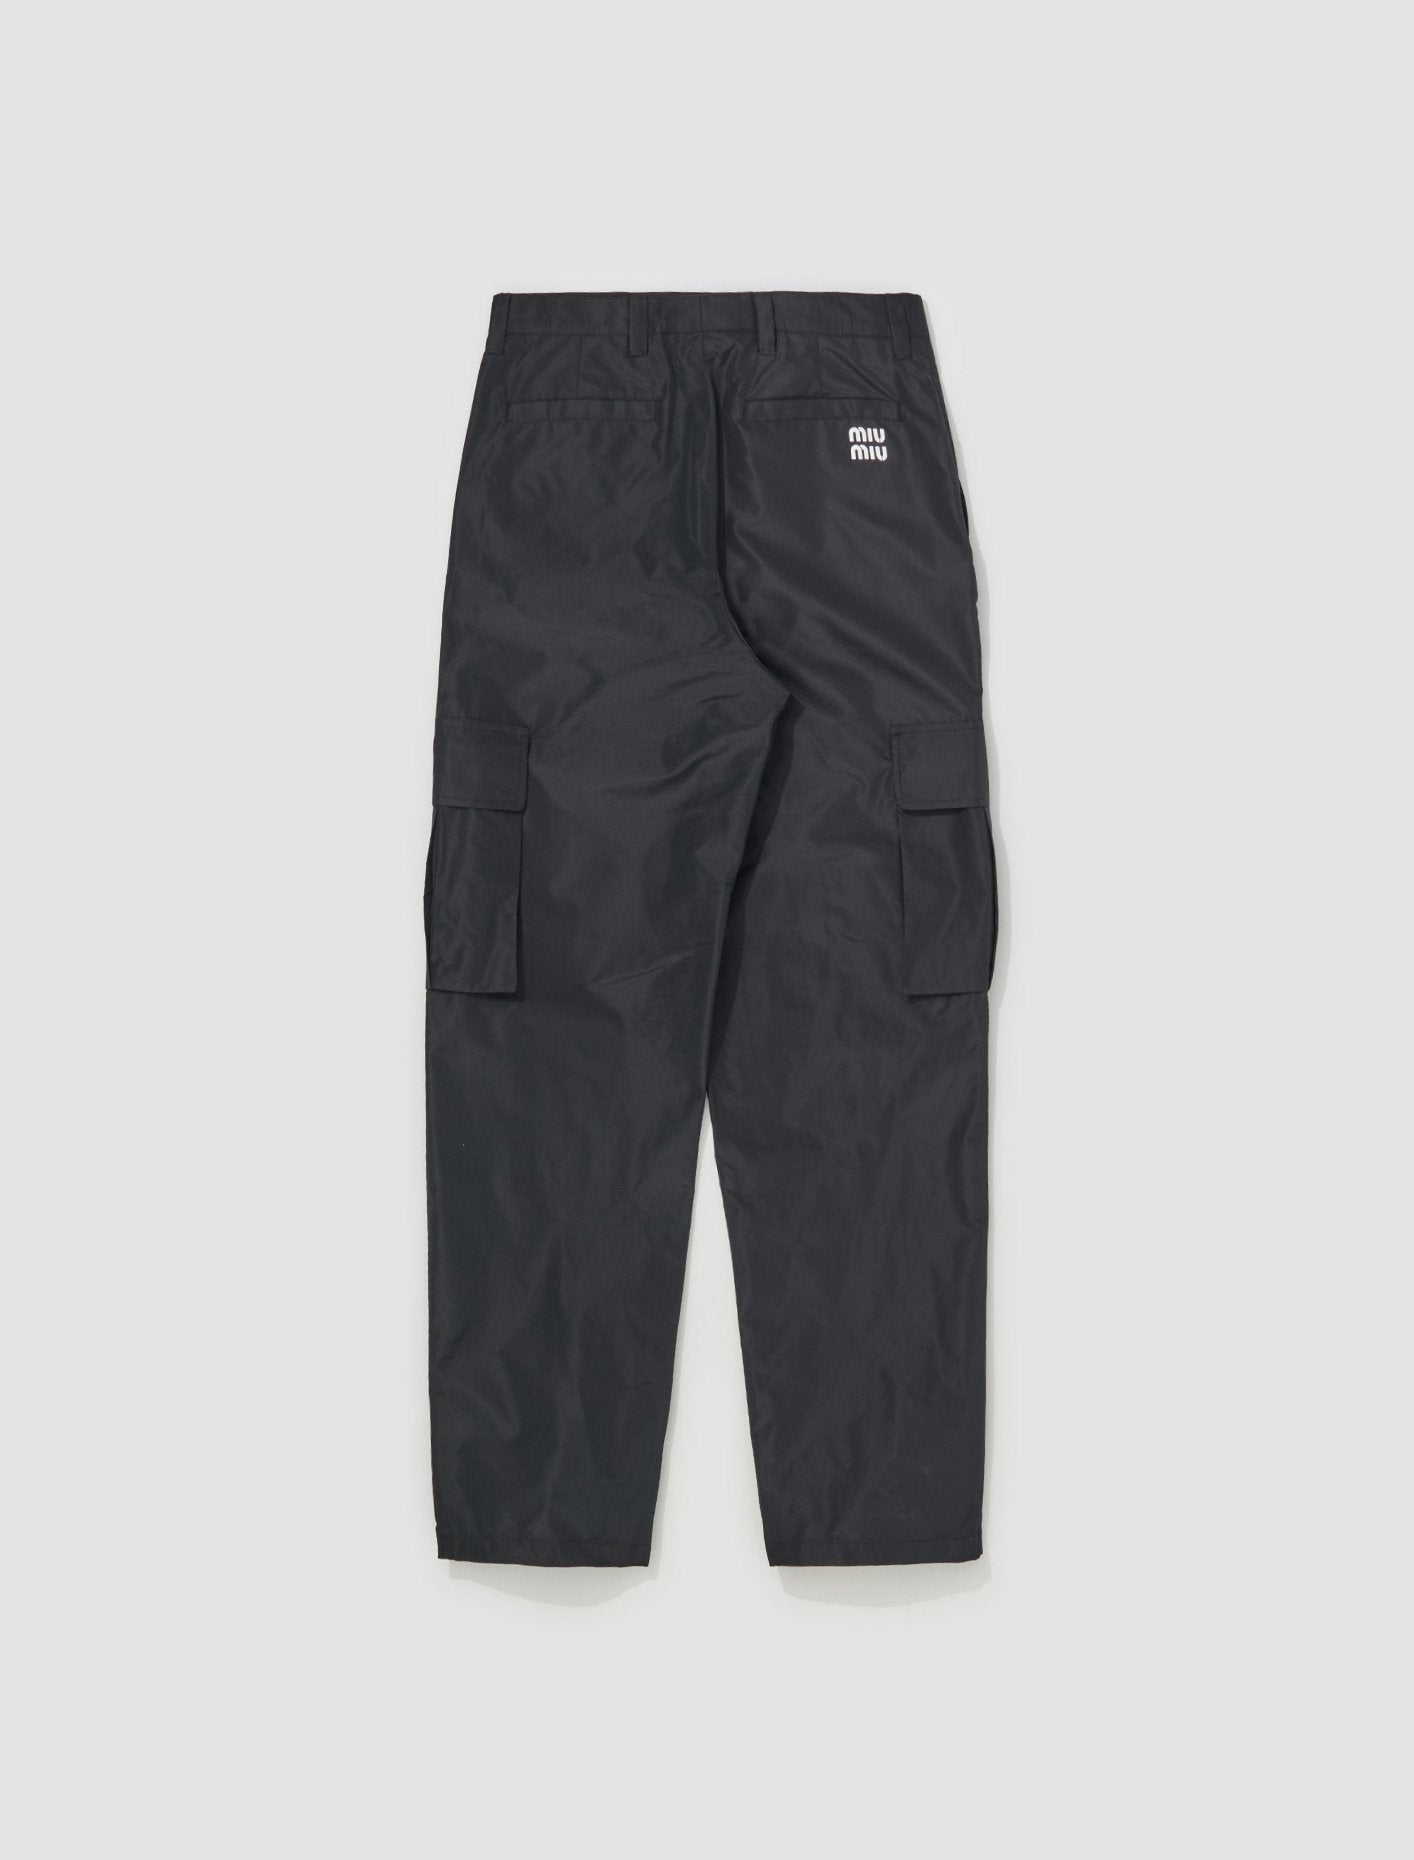 Technical Fabric Pants in Black